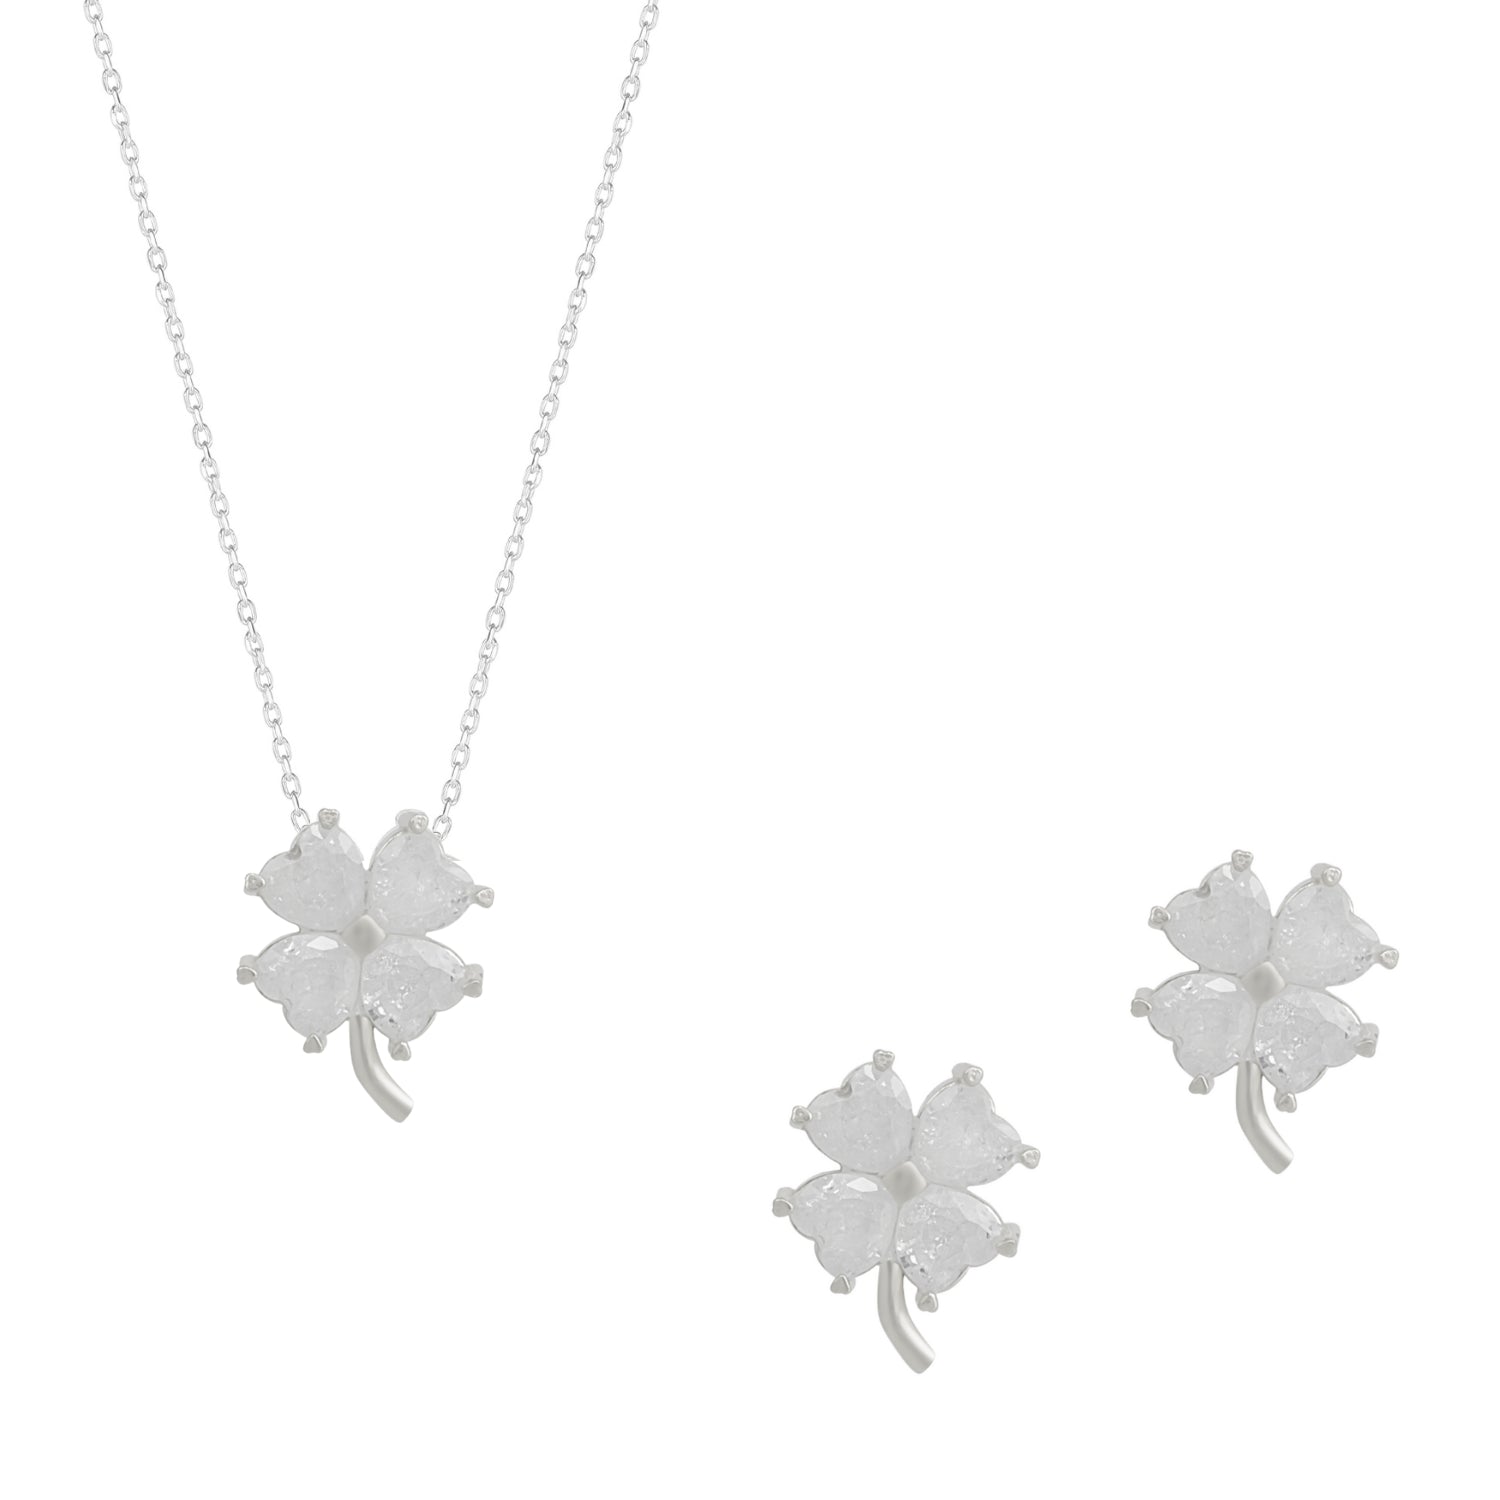 Four Leaf Clover Sterling Silver Necklace and Earring Set - White